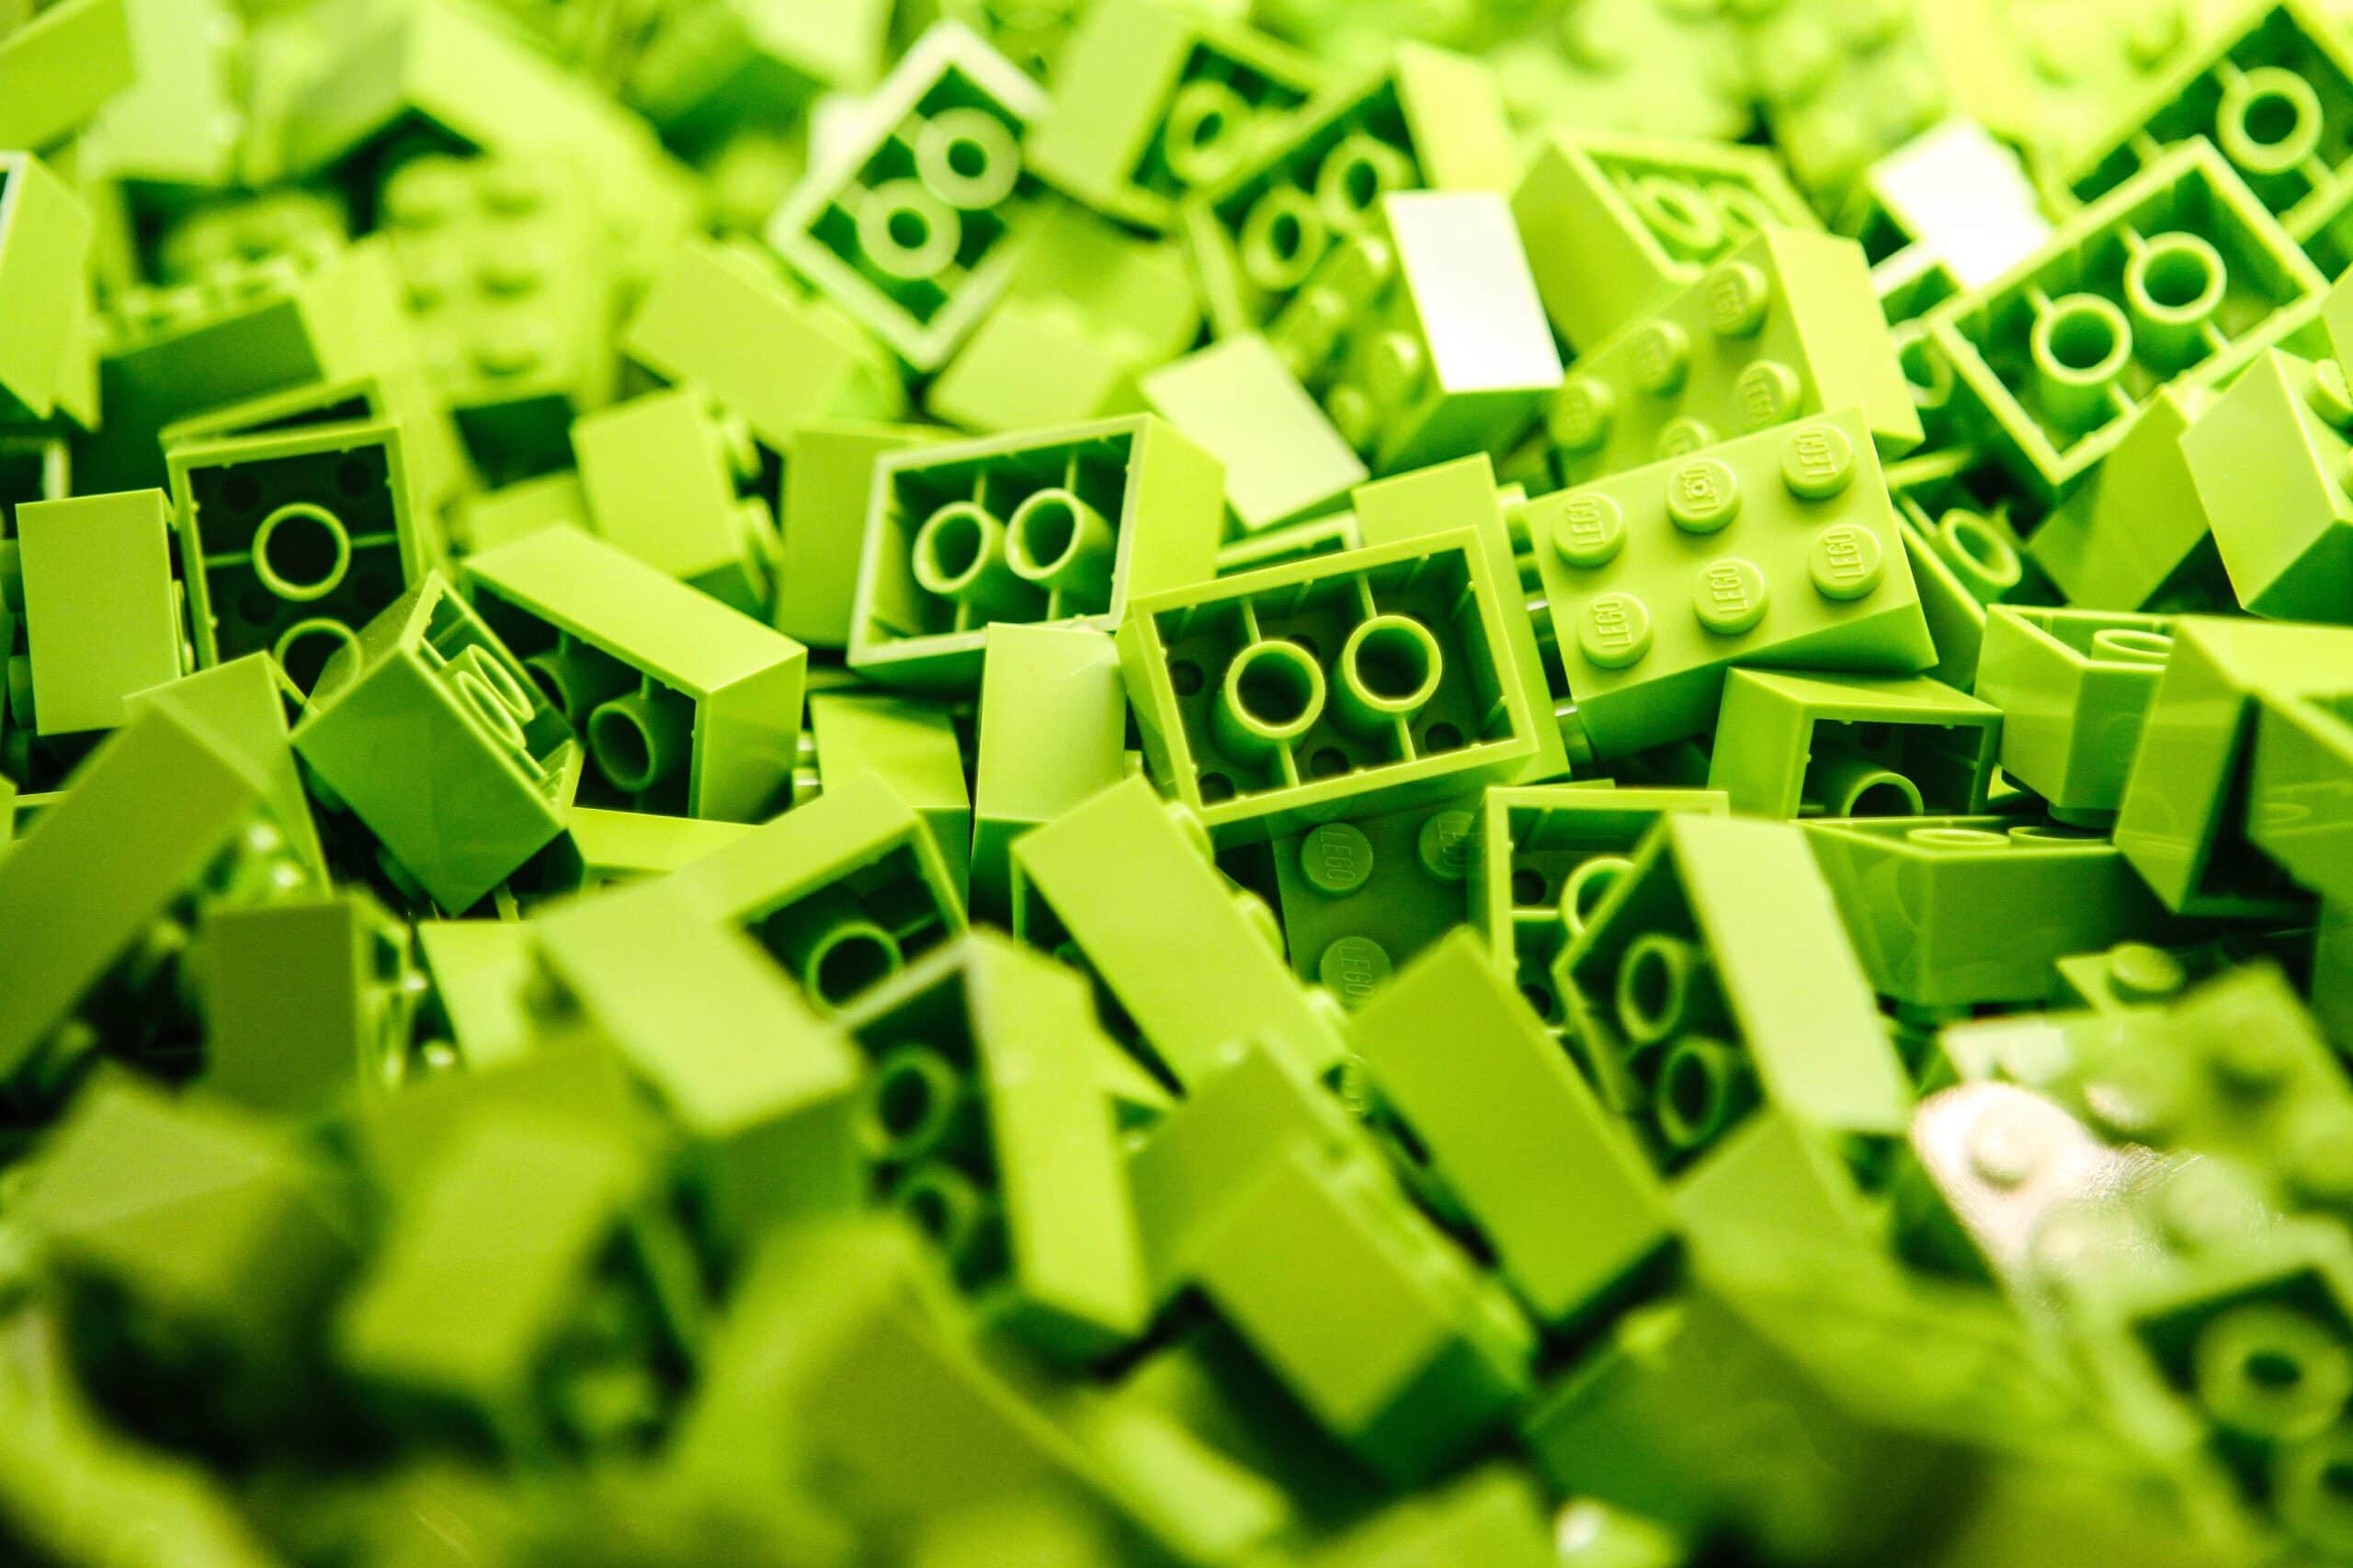 pile of a lot of green lego blocks